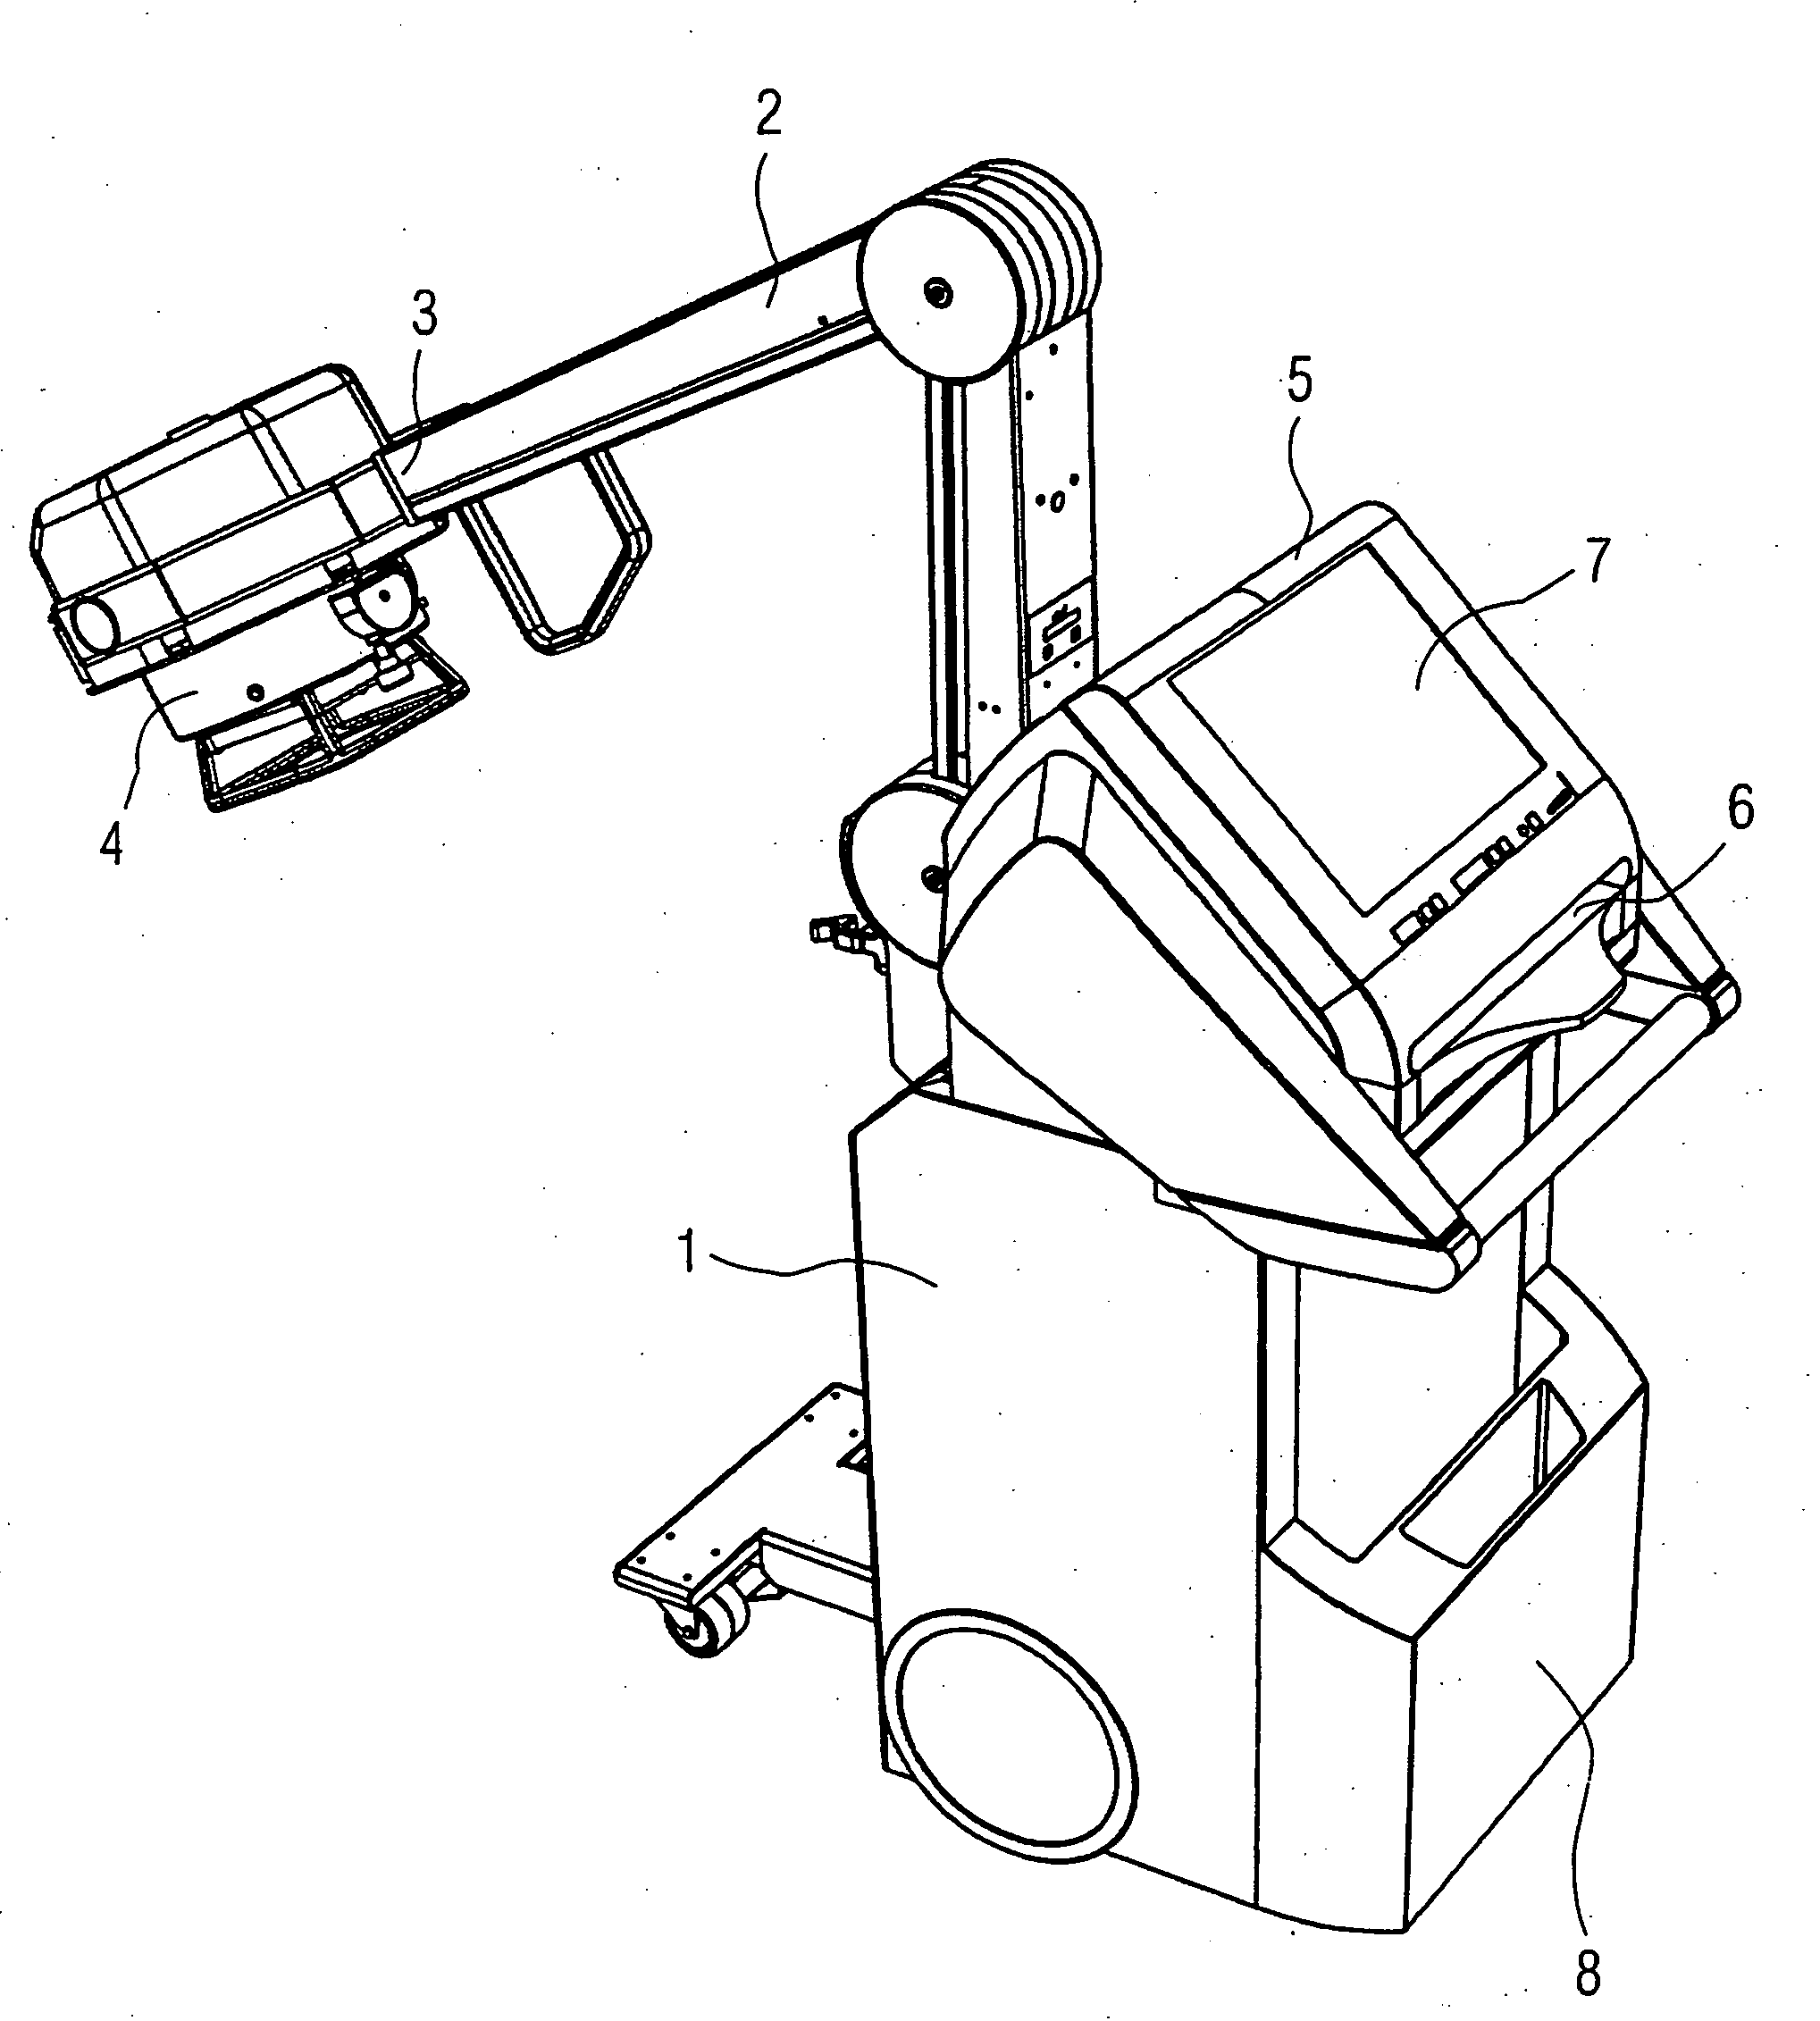 Mobile x-ray acquisition apparatus